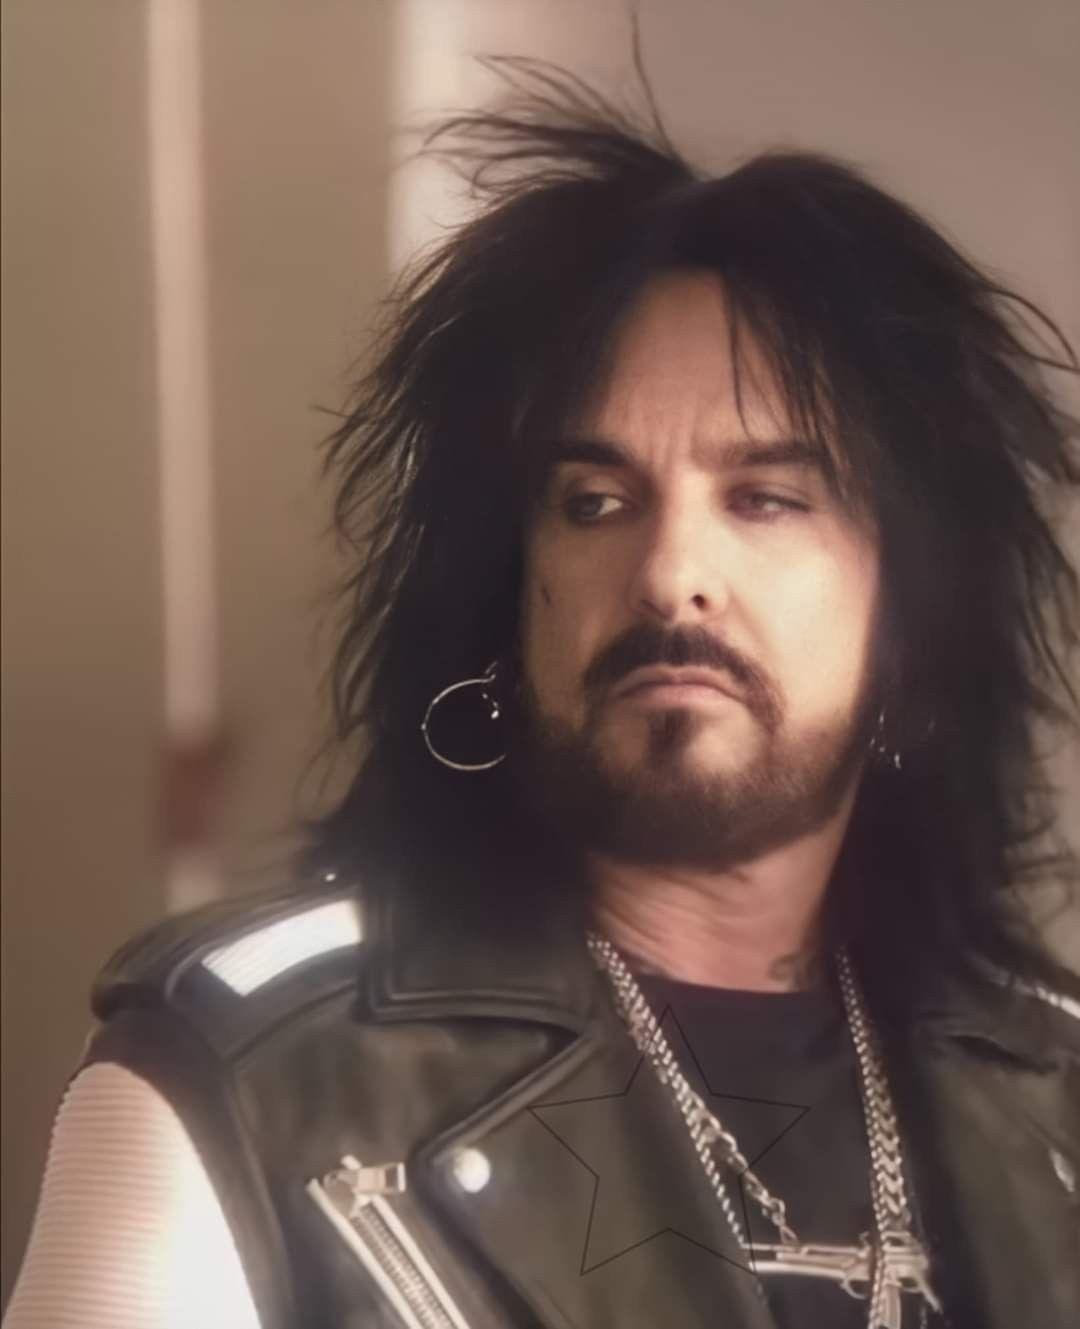 MÖTLEY CRÜE’s Nikki Sixx Loses His Temper, After Caught Lying To Fans About Lip-SyncGate